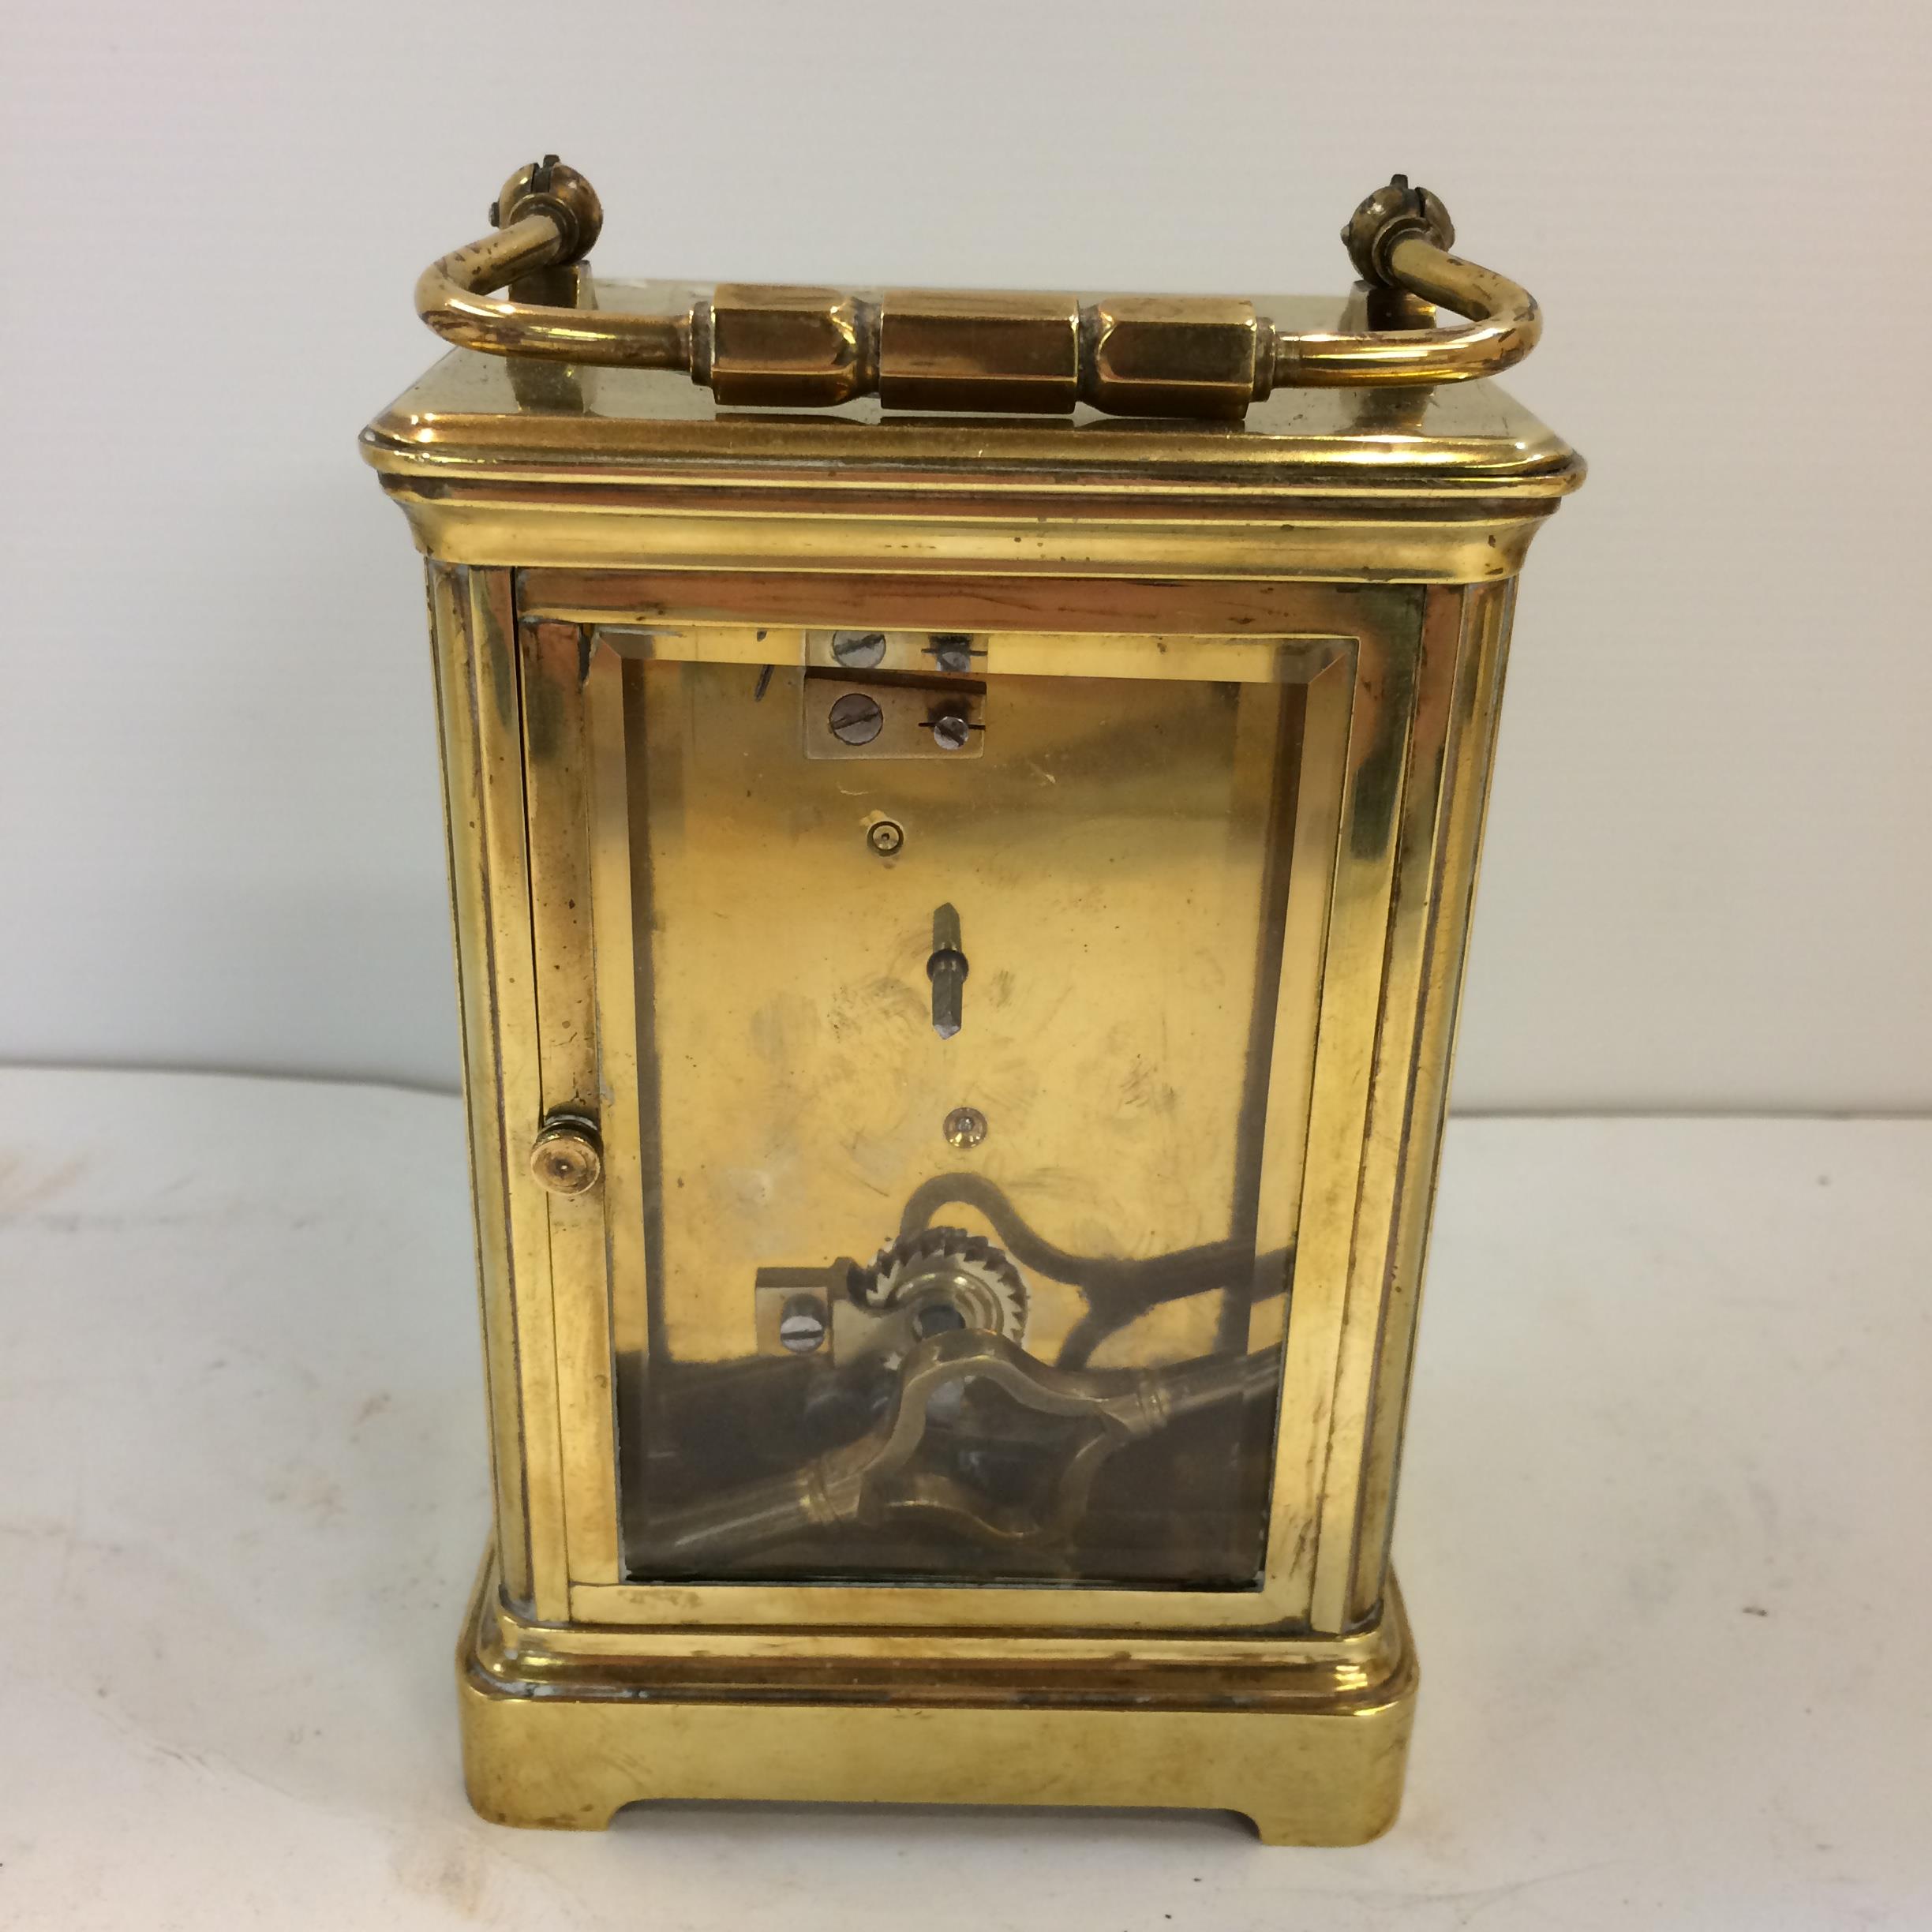 French gilt brass carriage clock with 4 bevelled glass panes with key - Image 3 of 5